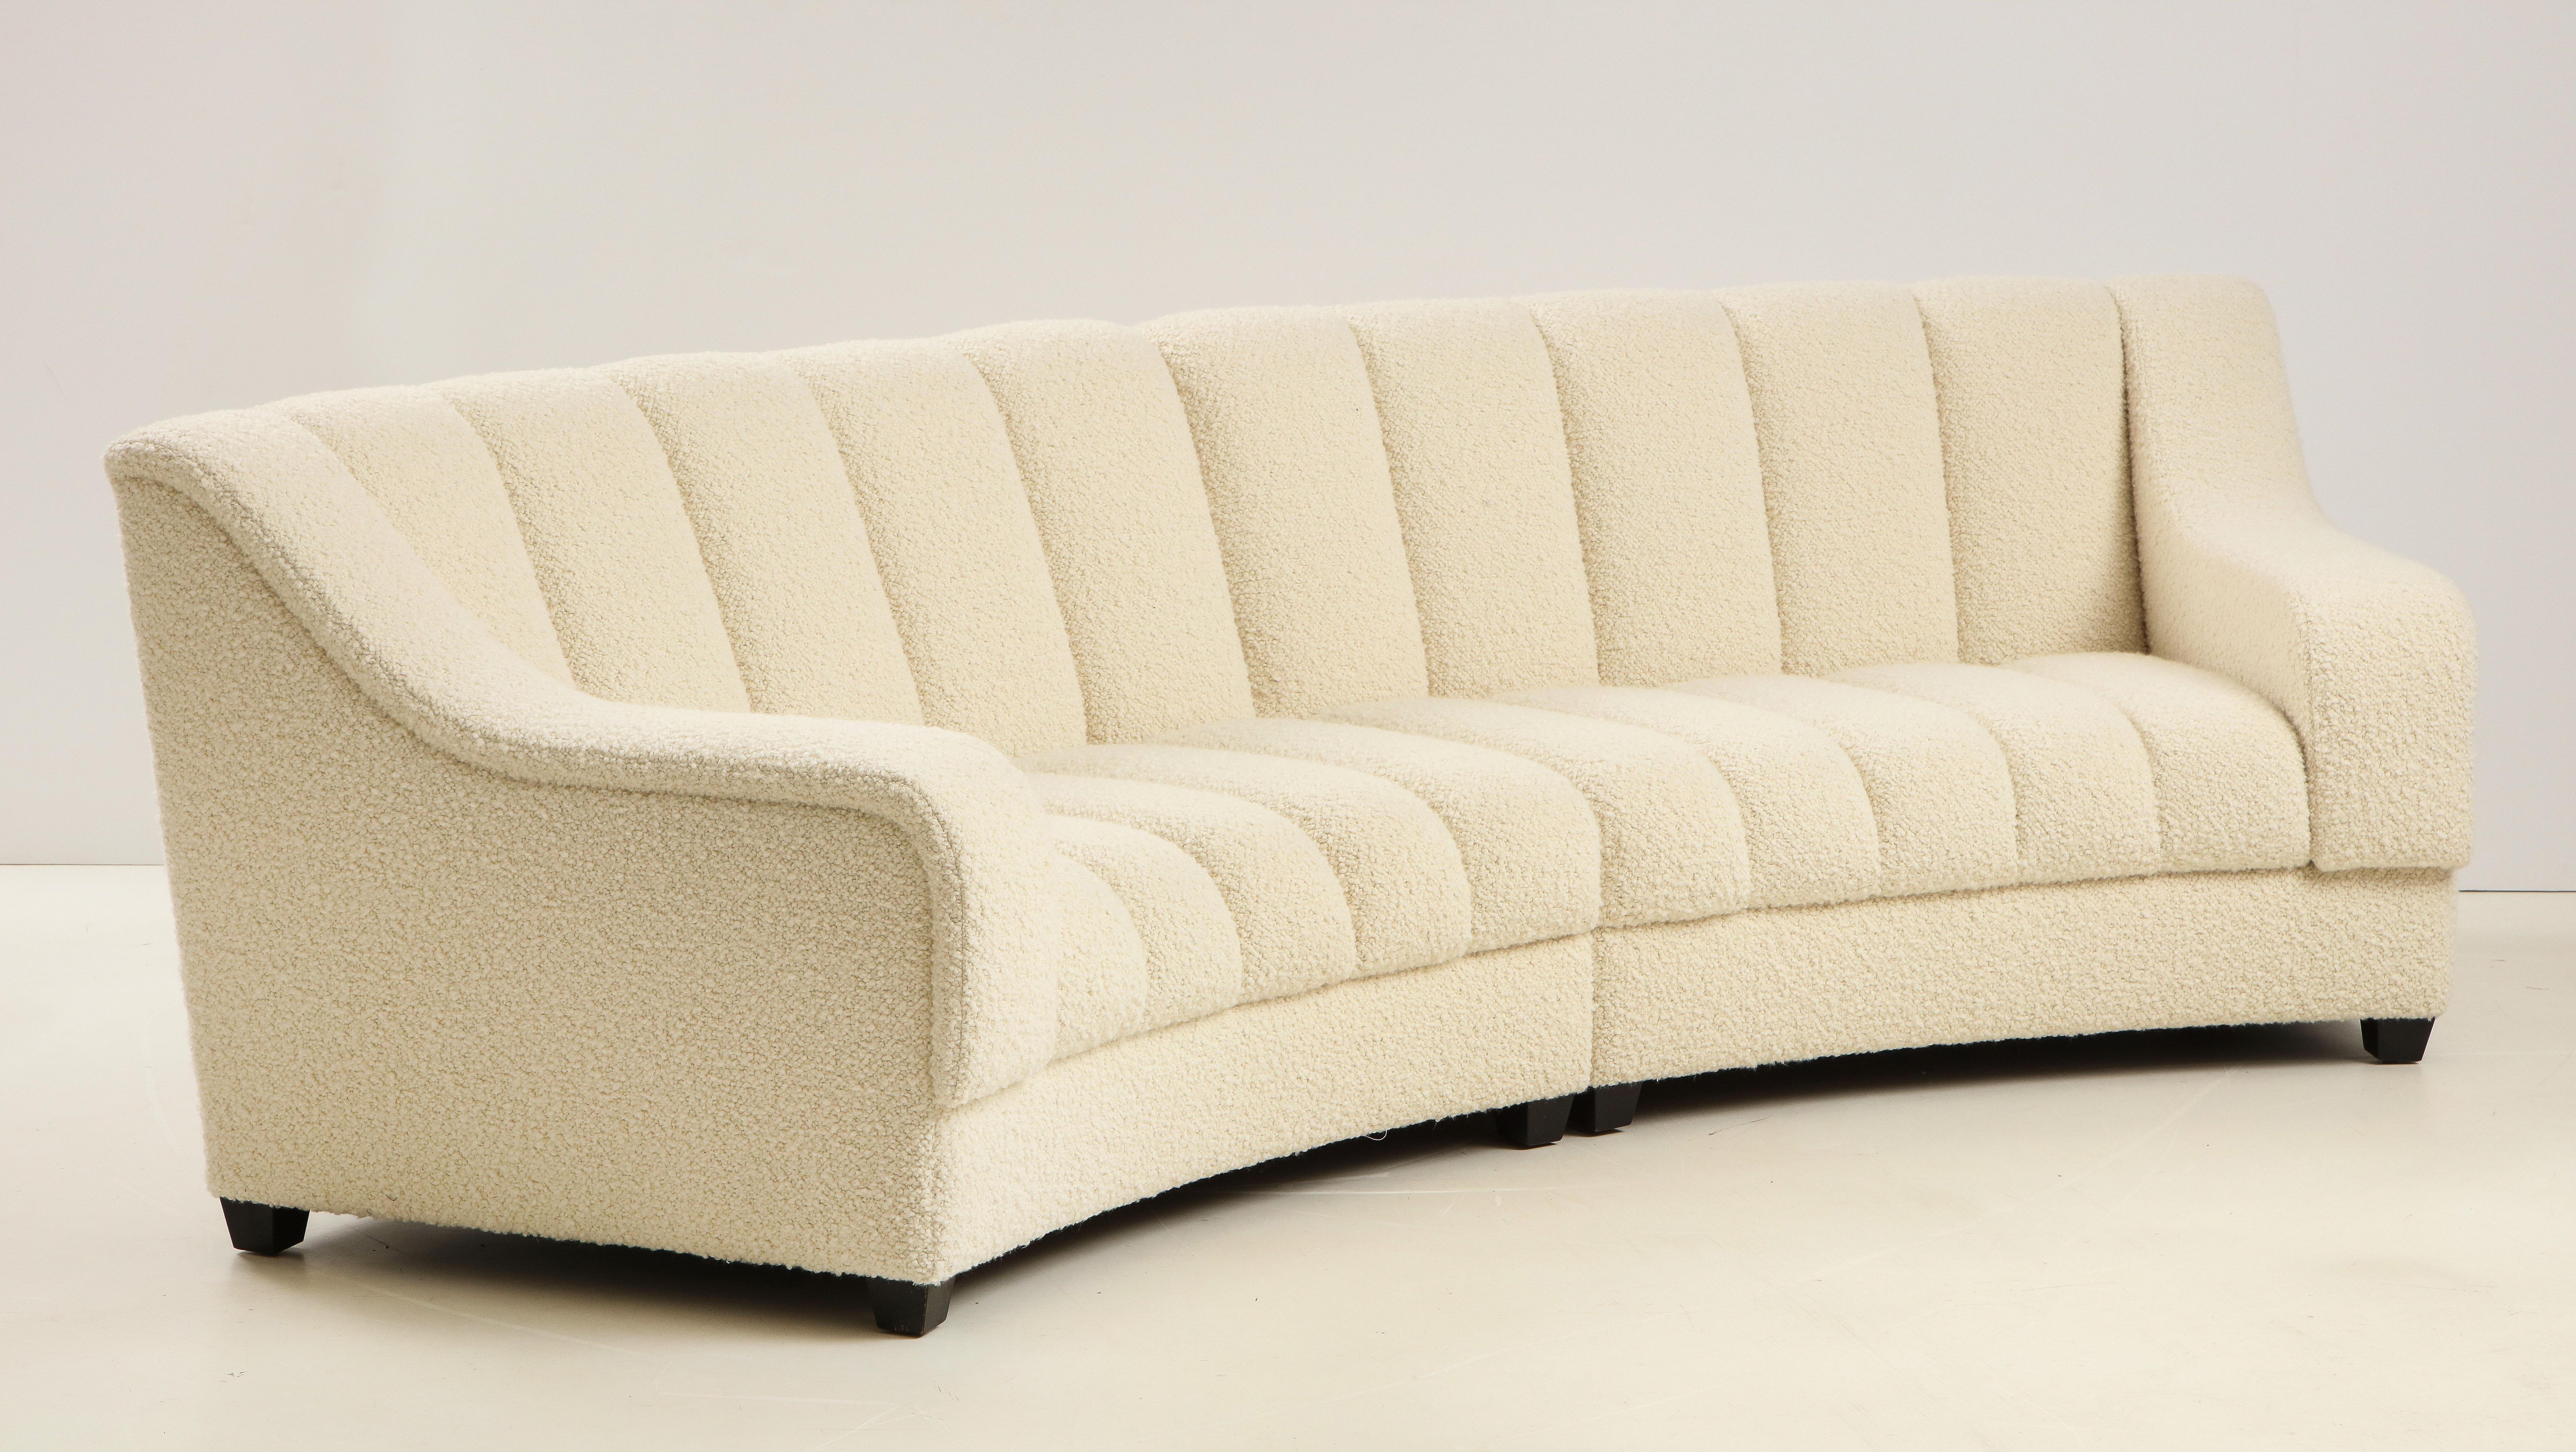 This curved sofa in Pierre Frey ivory boucle was newly handcrafted by master craftsmen in Florence, Italy. It consists of 2 modular sections which come together to form one unit. Segmented seat style inspired by De Sede design. Upholstered in french